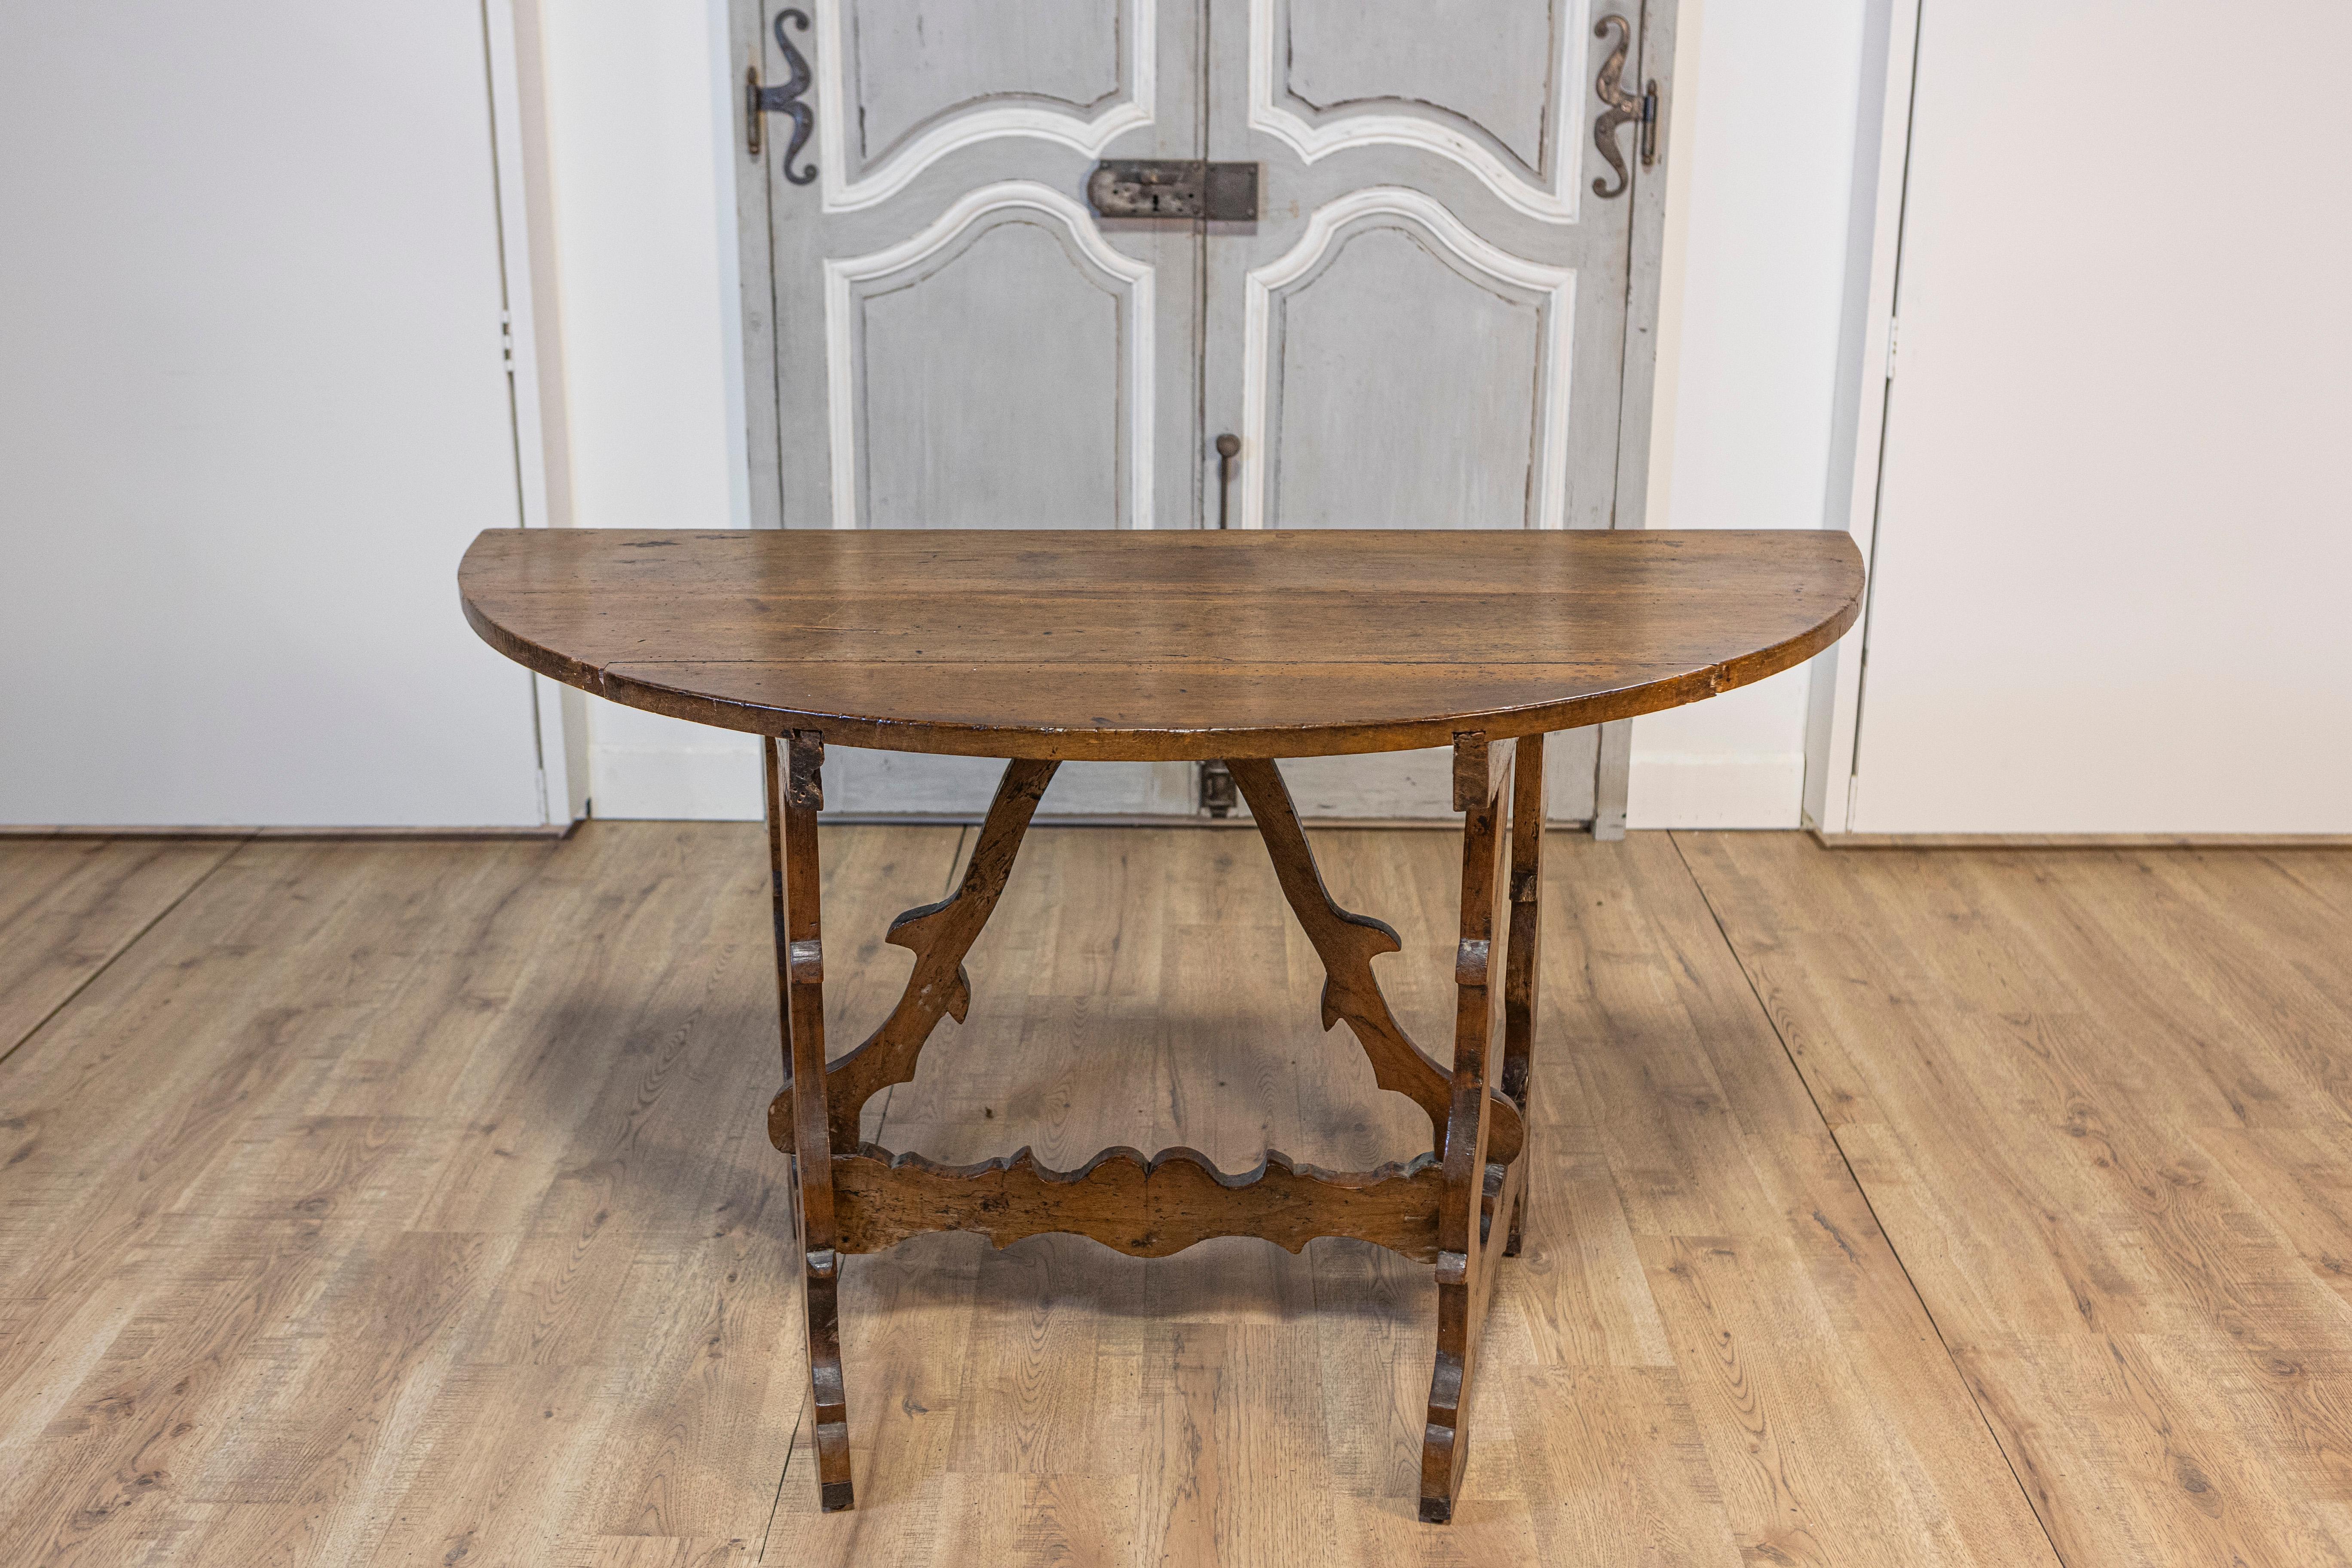 17th Century Italian Baroque Period Walnut Demilune Table with Carved Lyre Base For Sale 9